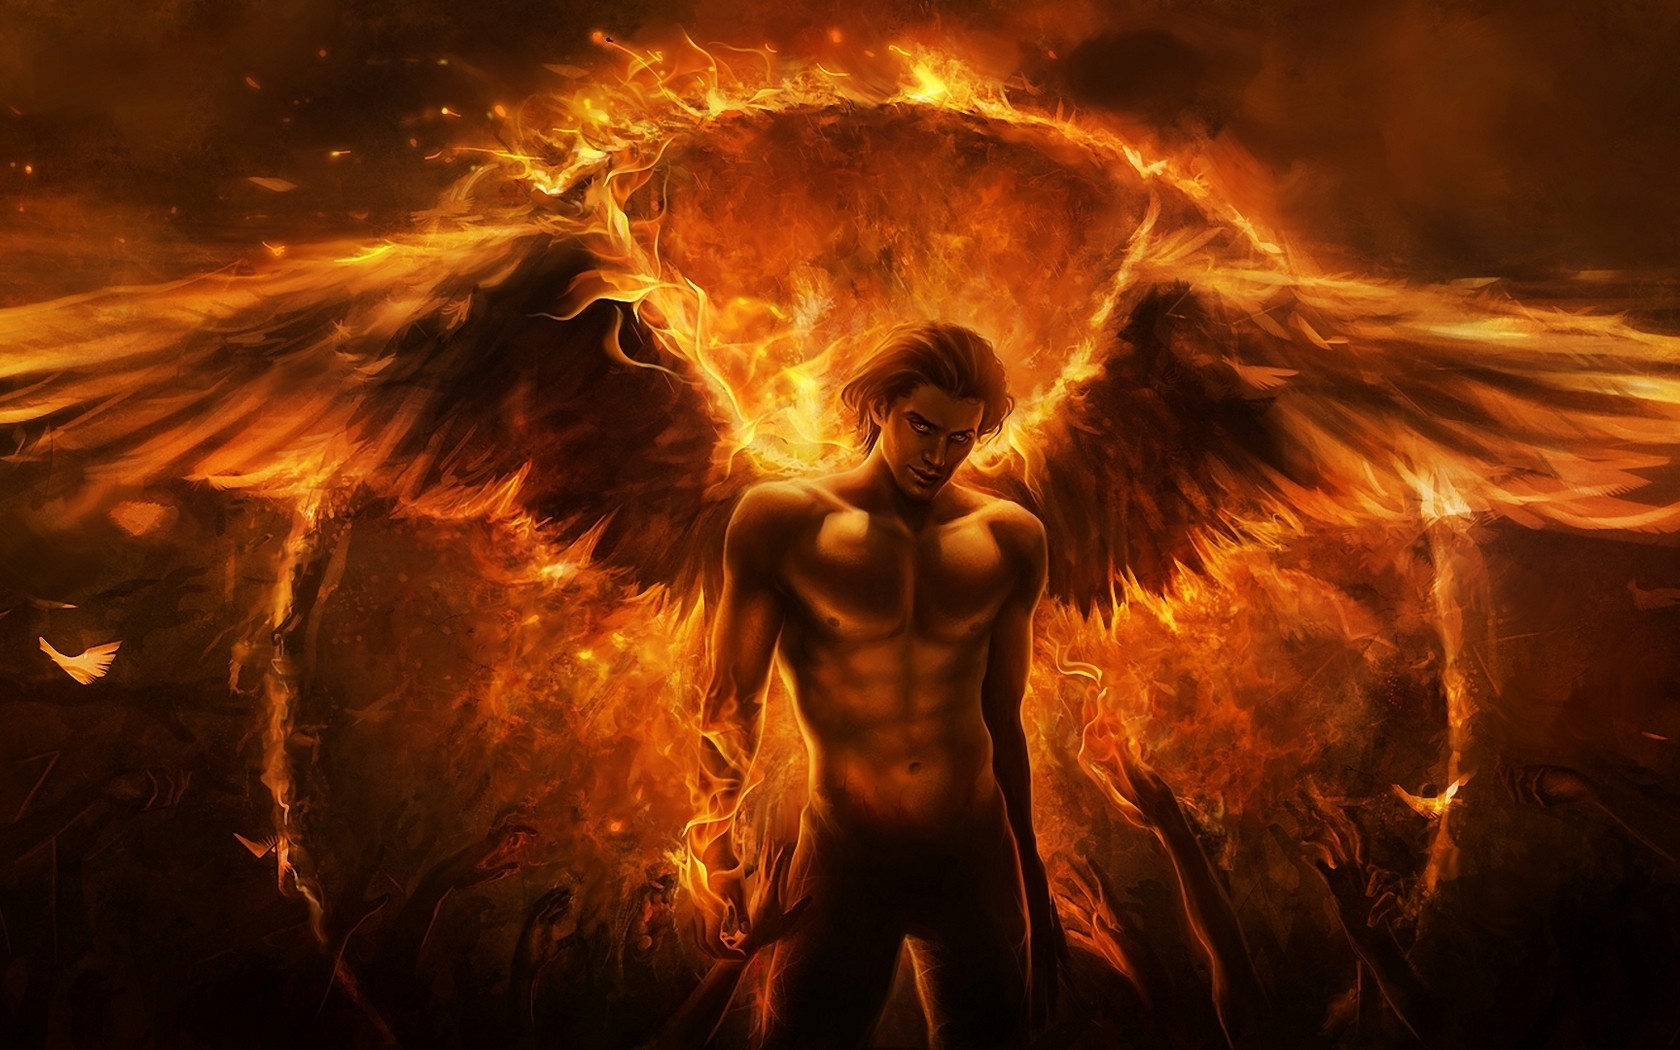 HD wallpaper Angels Abstract Wings Fire Men Artwork Hd Wallpapers by